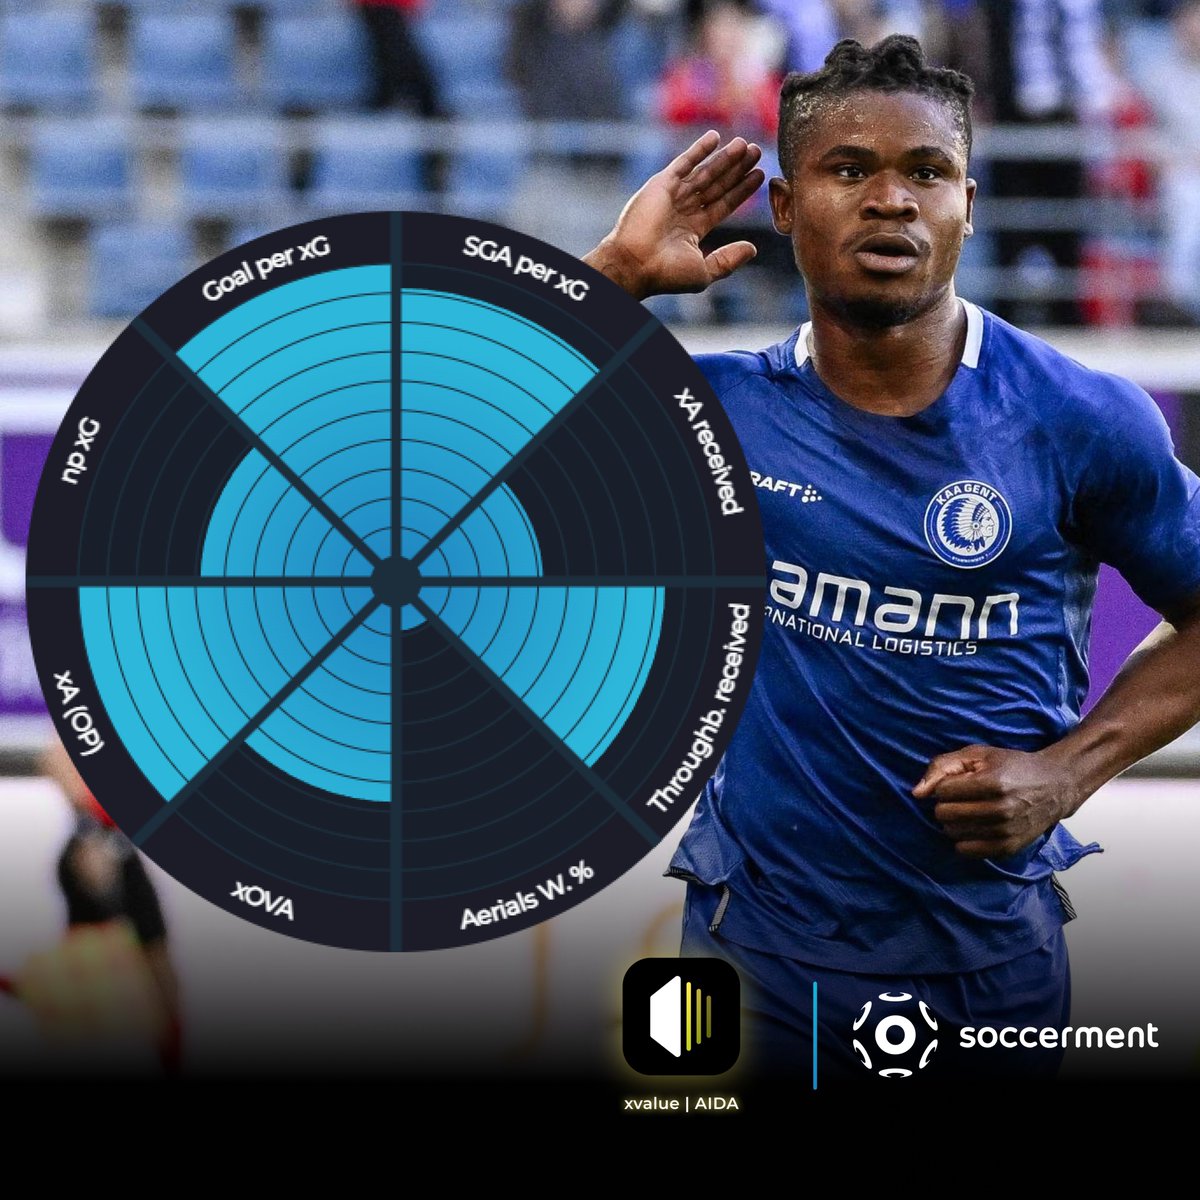 📢 Gift #Orban is on the verge of signing with #OlympiqueLyon for a reported €13M fee. 

Check out his impressive data from the past two seasons at #Gent: 👇

🇳🇬 Gift Orban, a forward for KAA Gent, played 1229 minutes across 16 matches in the 2022 season, scoring 15 goals and